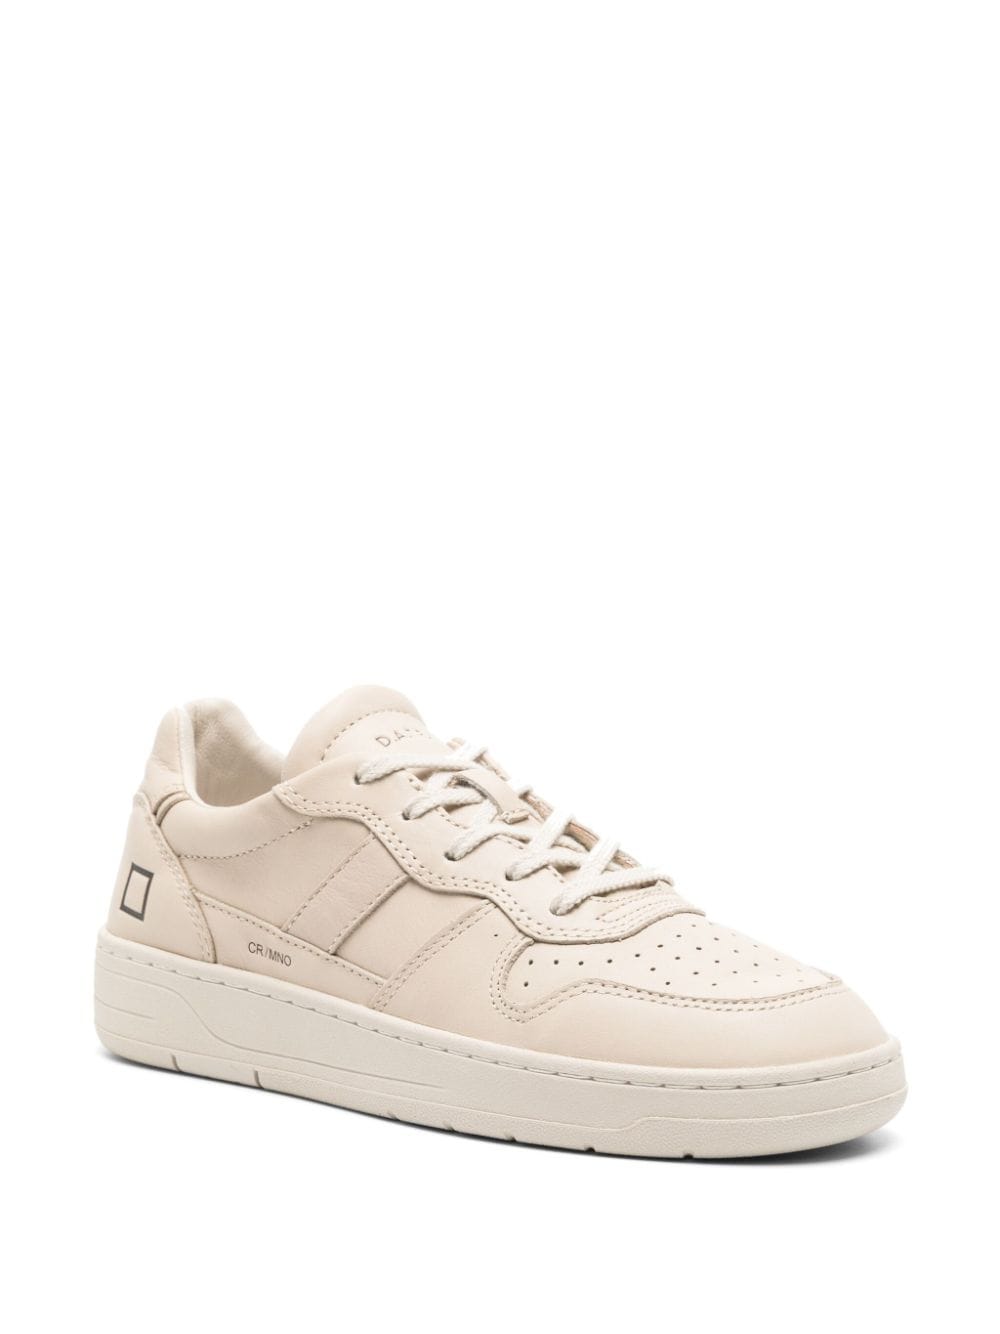 D.A.T.E. logo-print leather sneakers - Beige